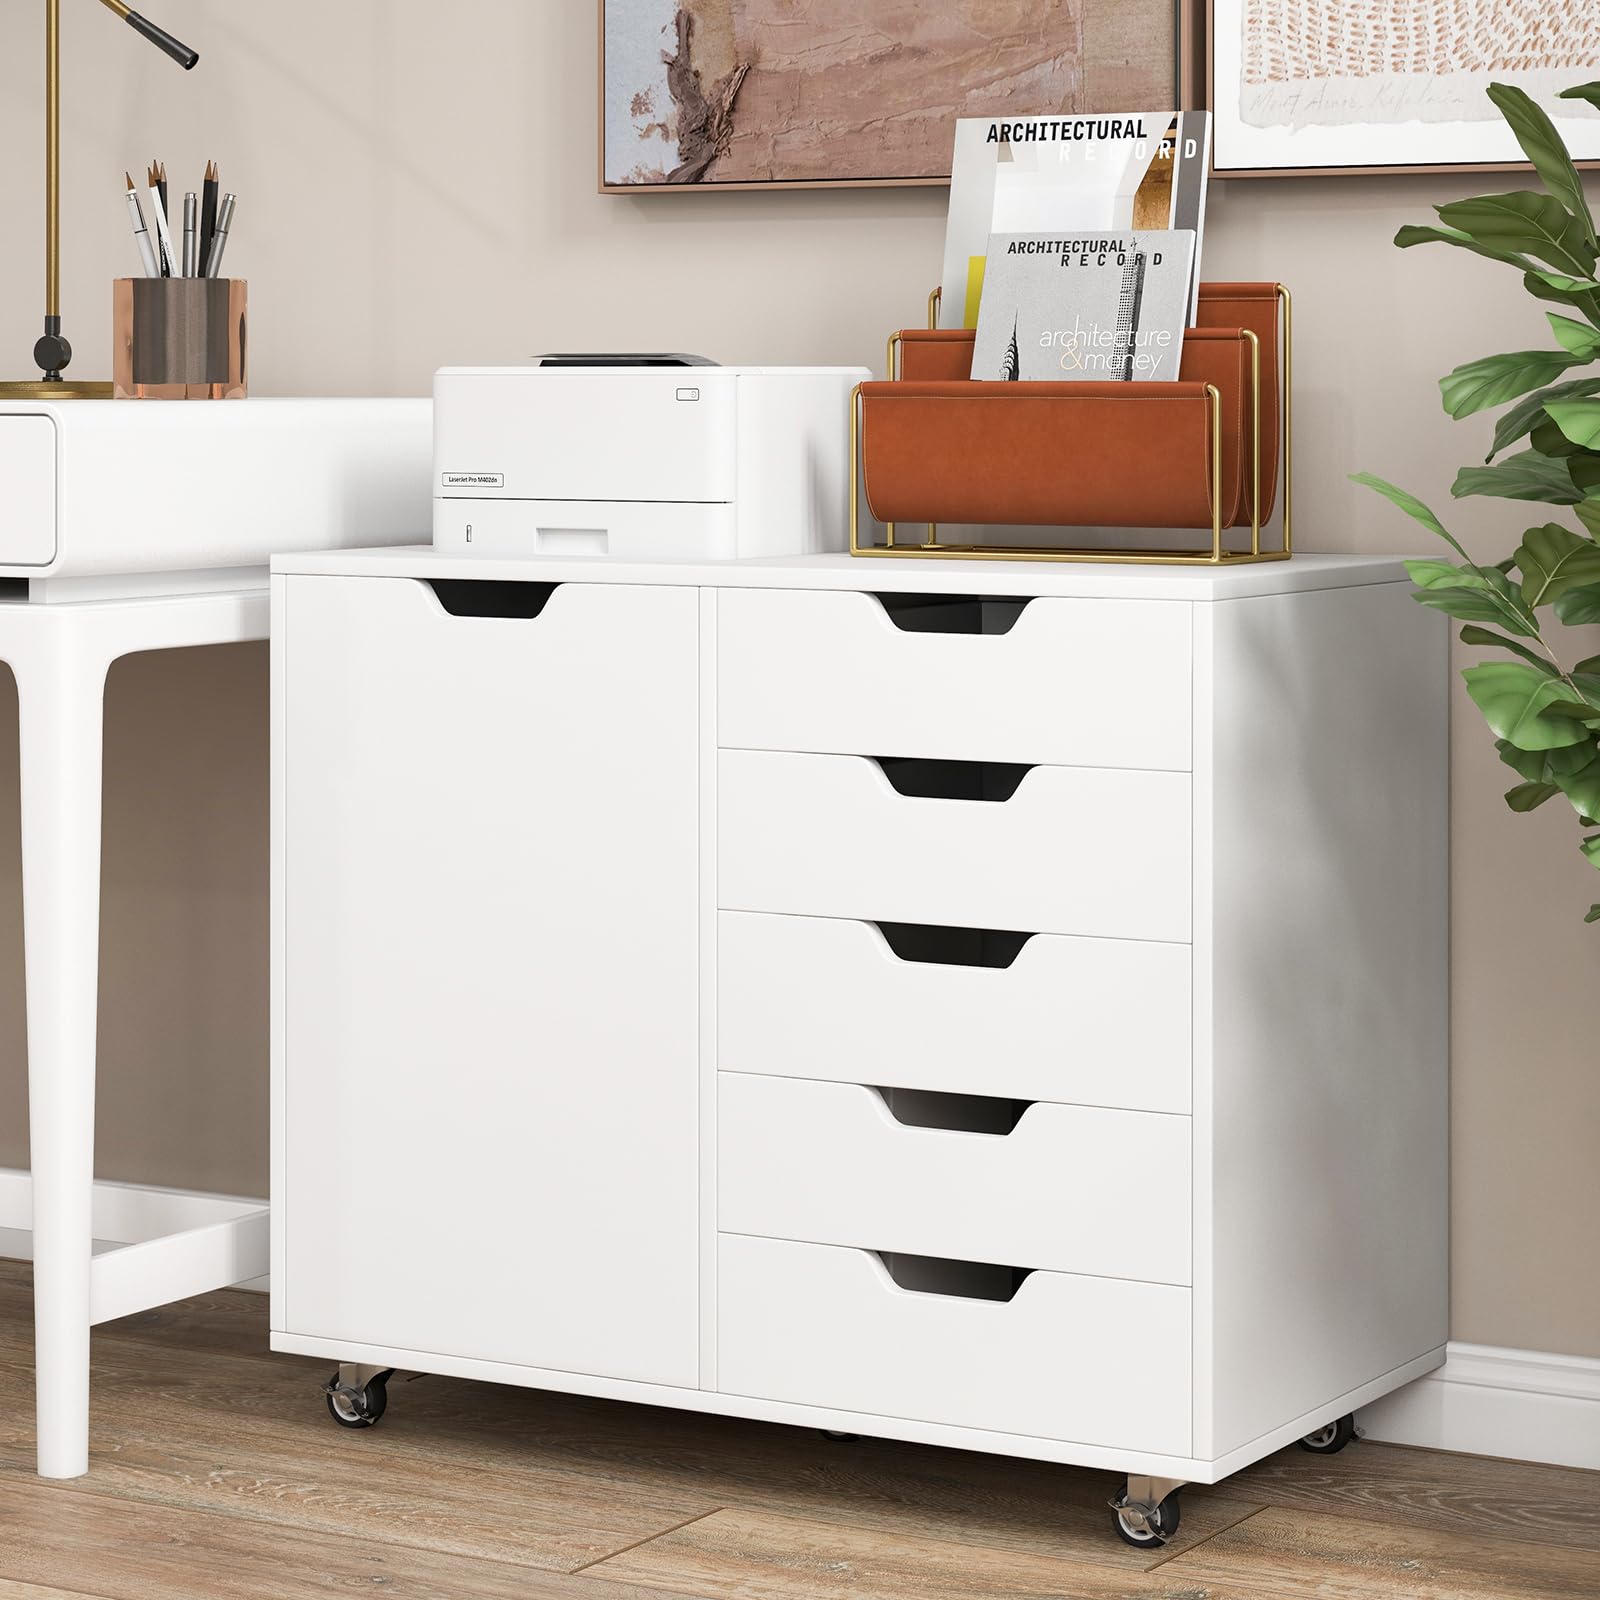 Giantex Lateral File Cabinet with Shelves - 5 Drawer Office Cabinet, White